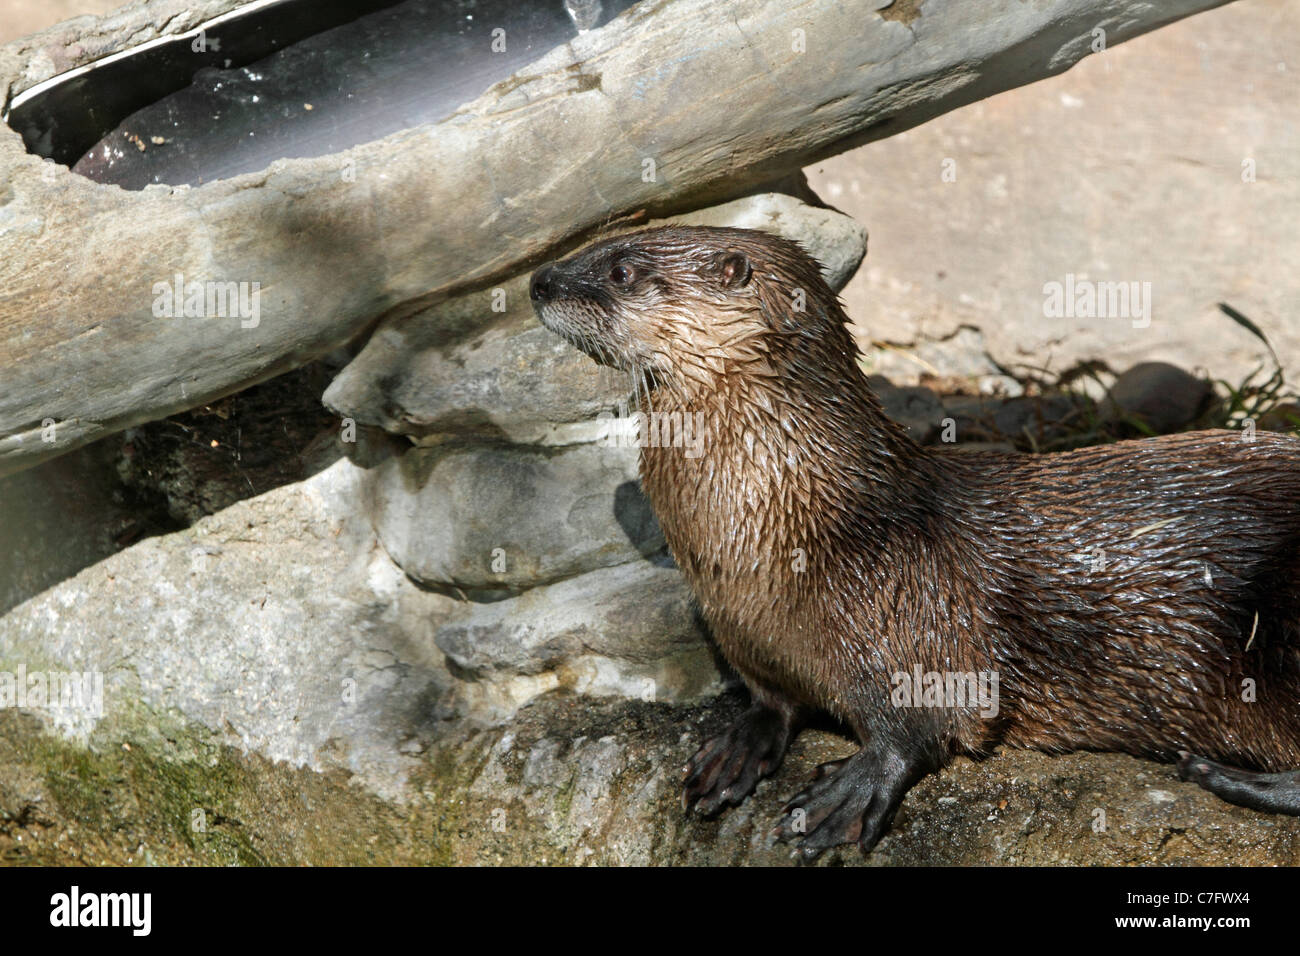 A North American River Otter, Lontra canadensis. Turtleback Zoo, West Orange, New Jersey, USA Stock Photo